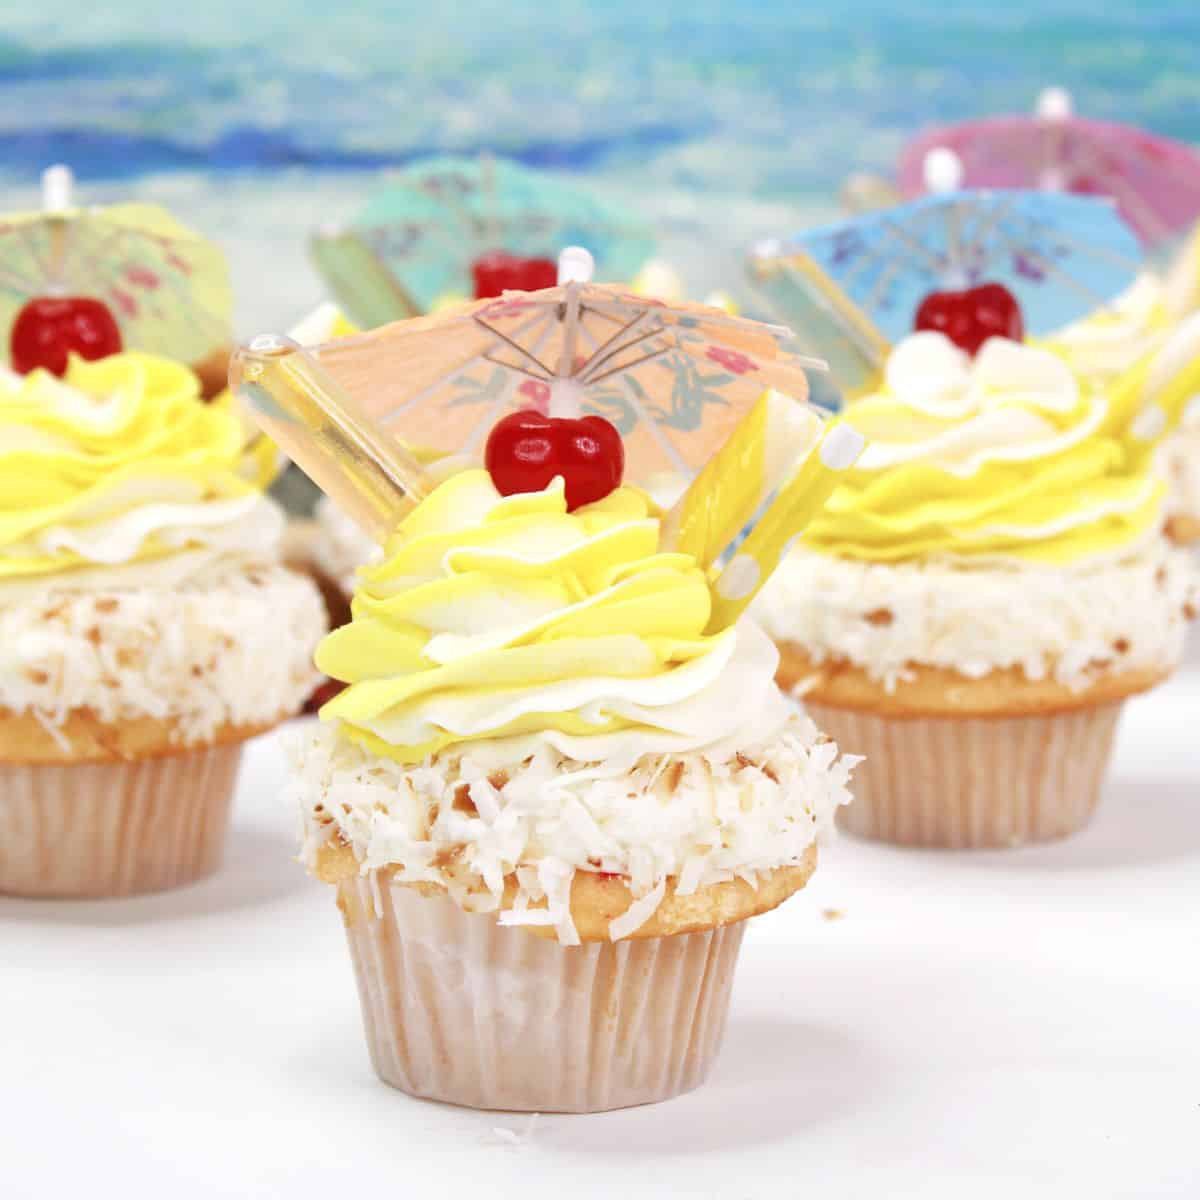 Three pina colada cupcakes with coconut and yellow frosting topped with a cherry and an umbrella.